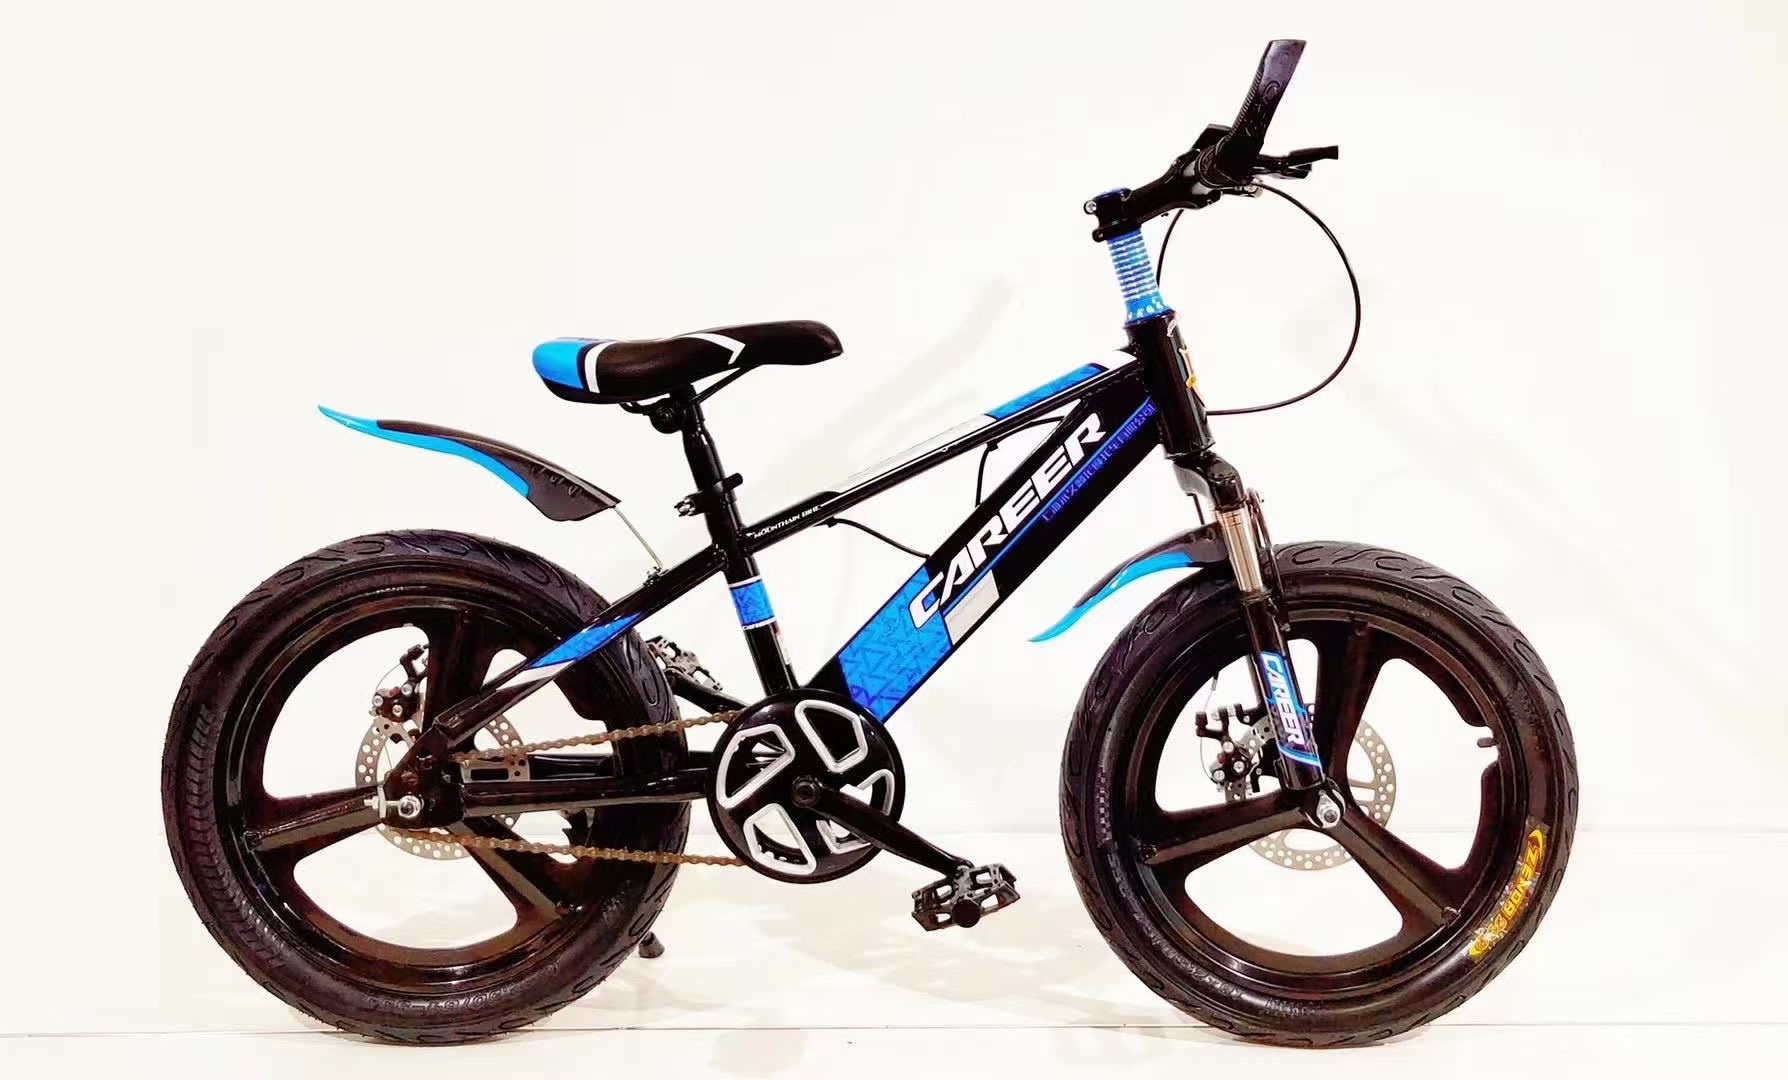 2019 New Kids Bikes / Children Bicycle /Bicycle for 3-10 years old child with cheap price